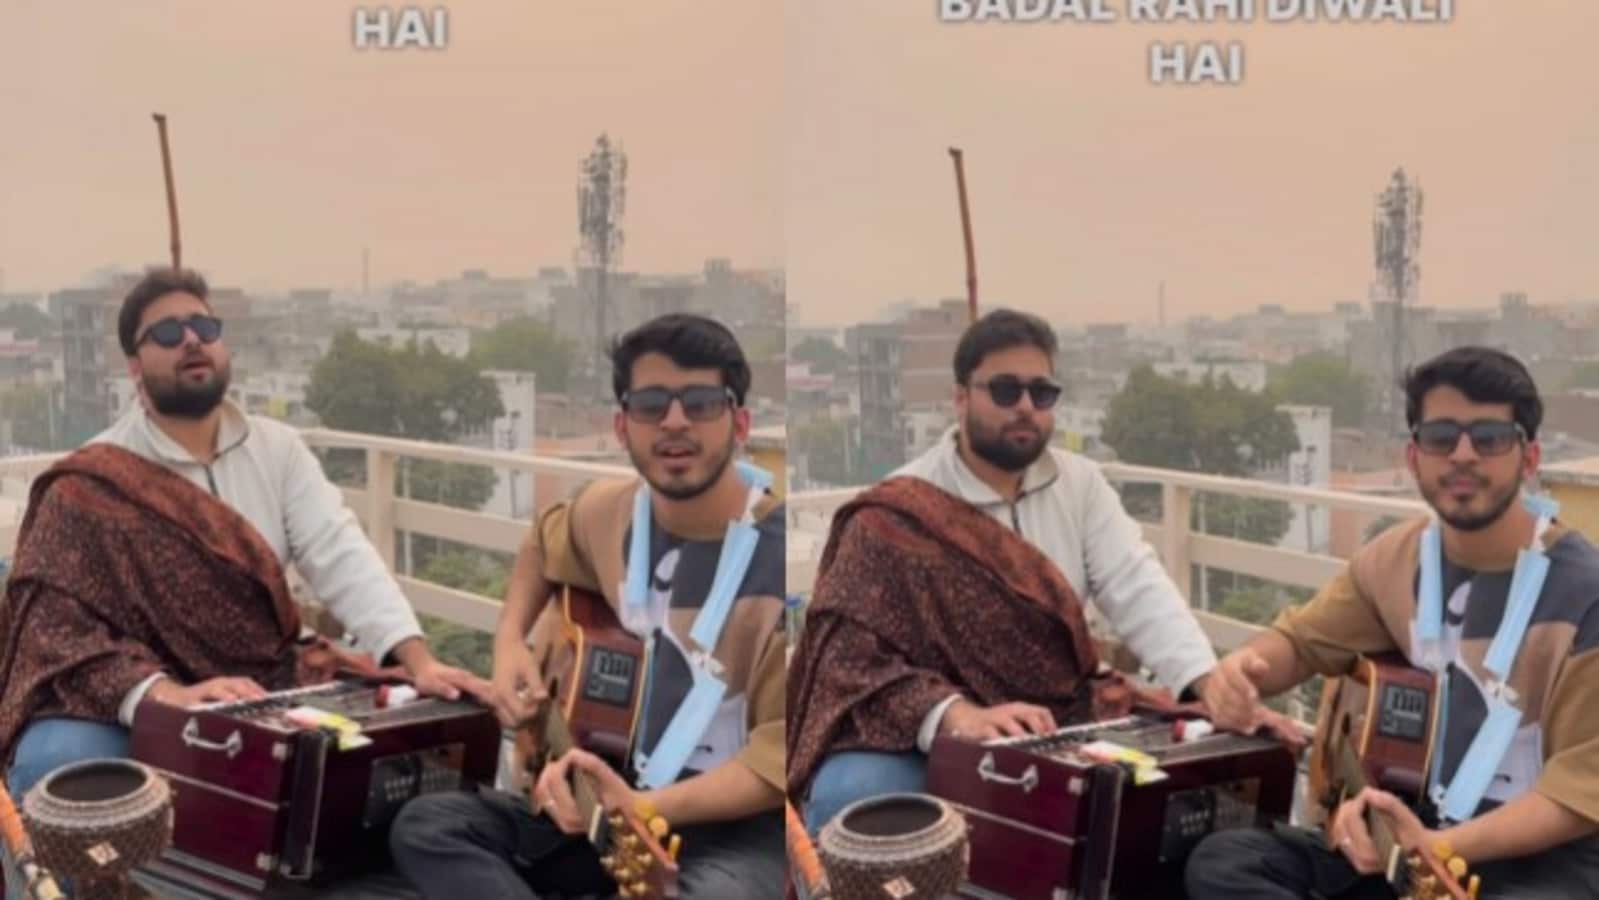 Duo's melody on Delhi's air pollution strikes a chord with netizens. Watch